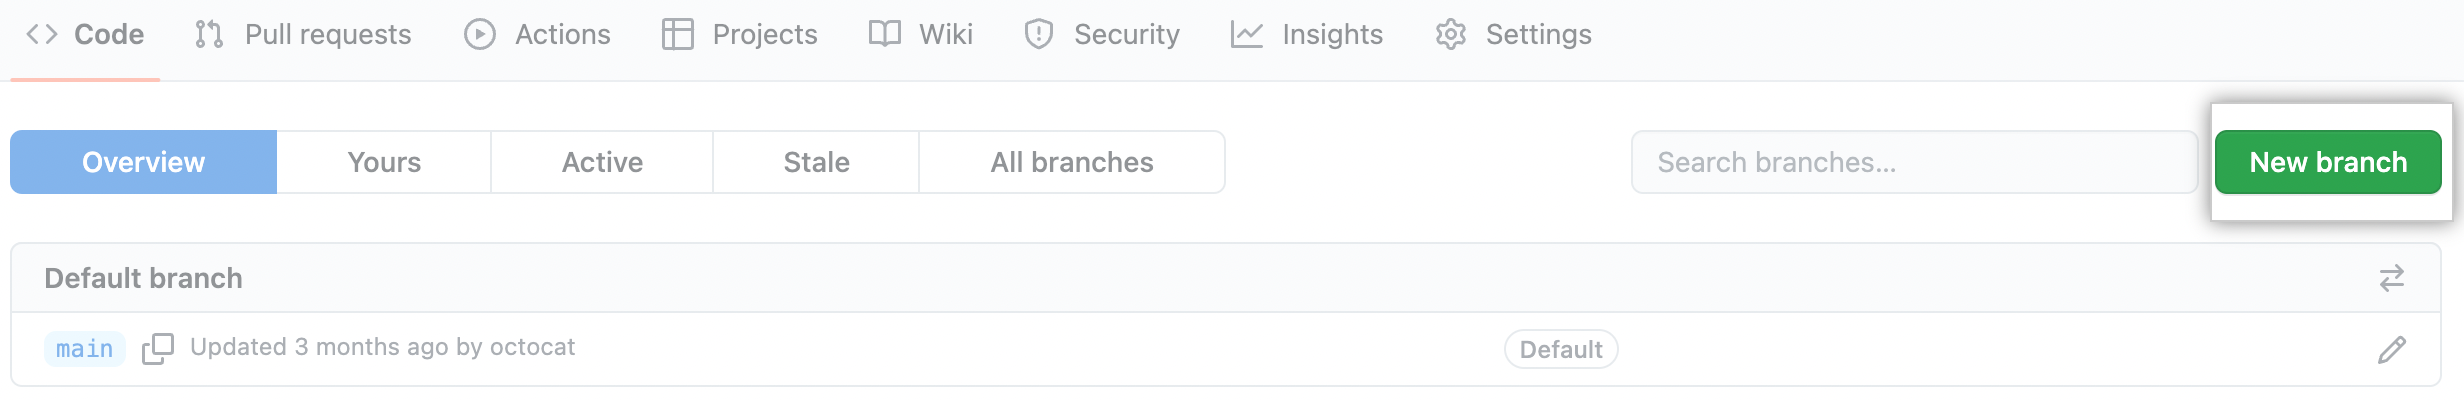 Screenshot of branches overview page with new branch button emphasized